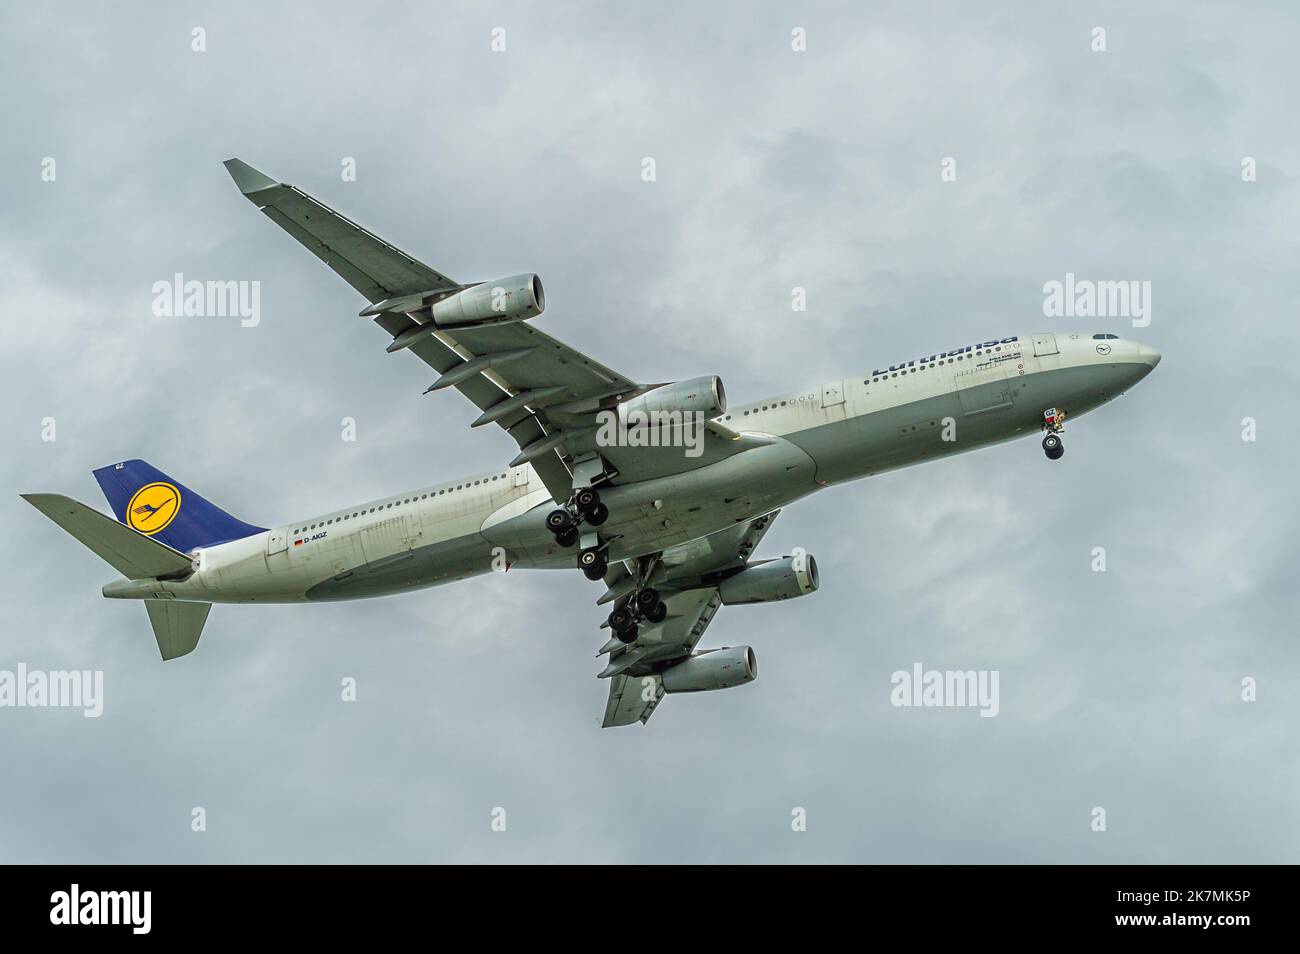 Lufthansa Airbus A340-313X on final approach into Singapore Changi airport Stock Photo